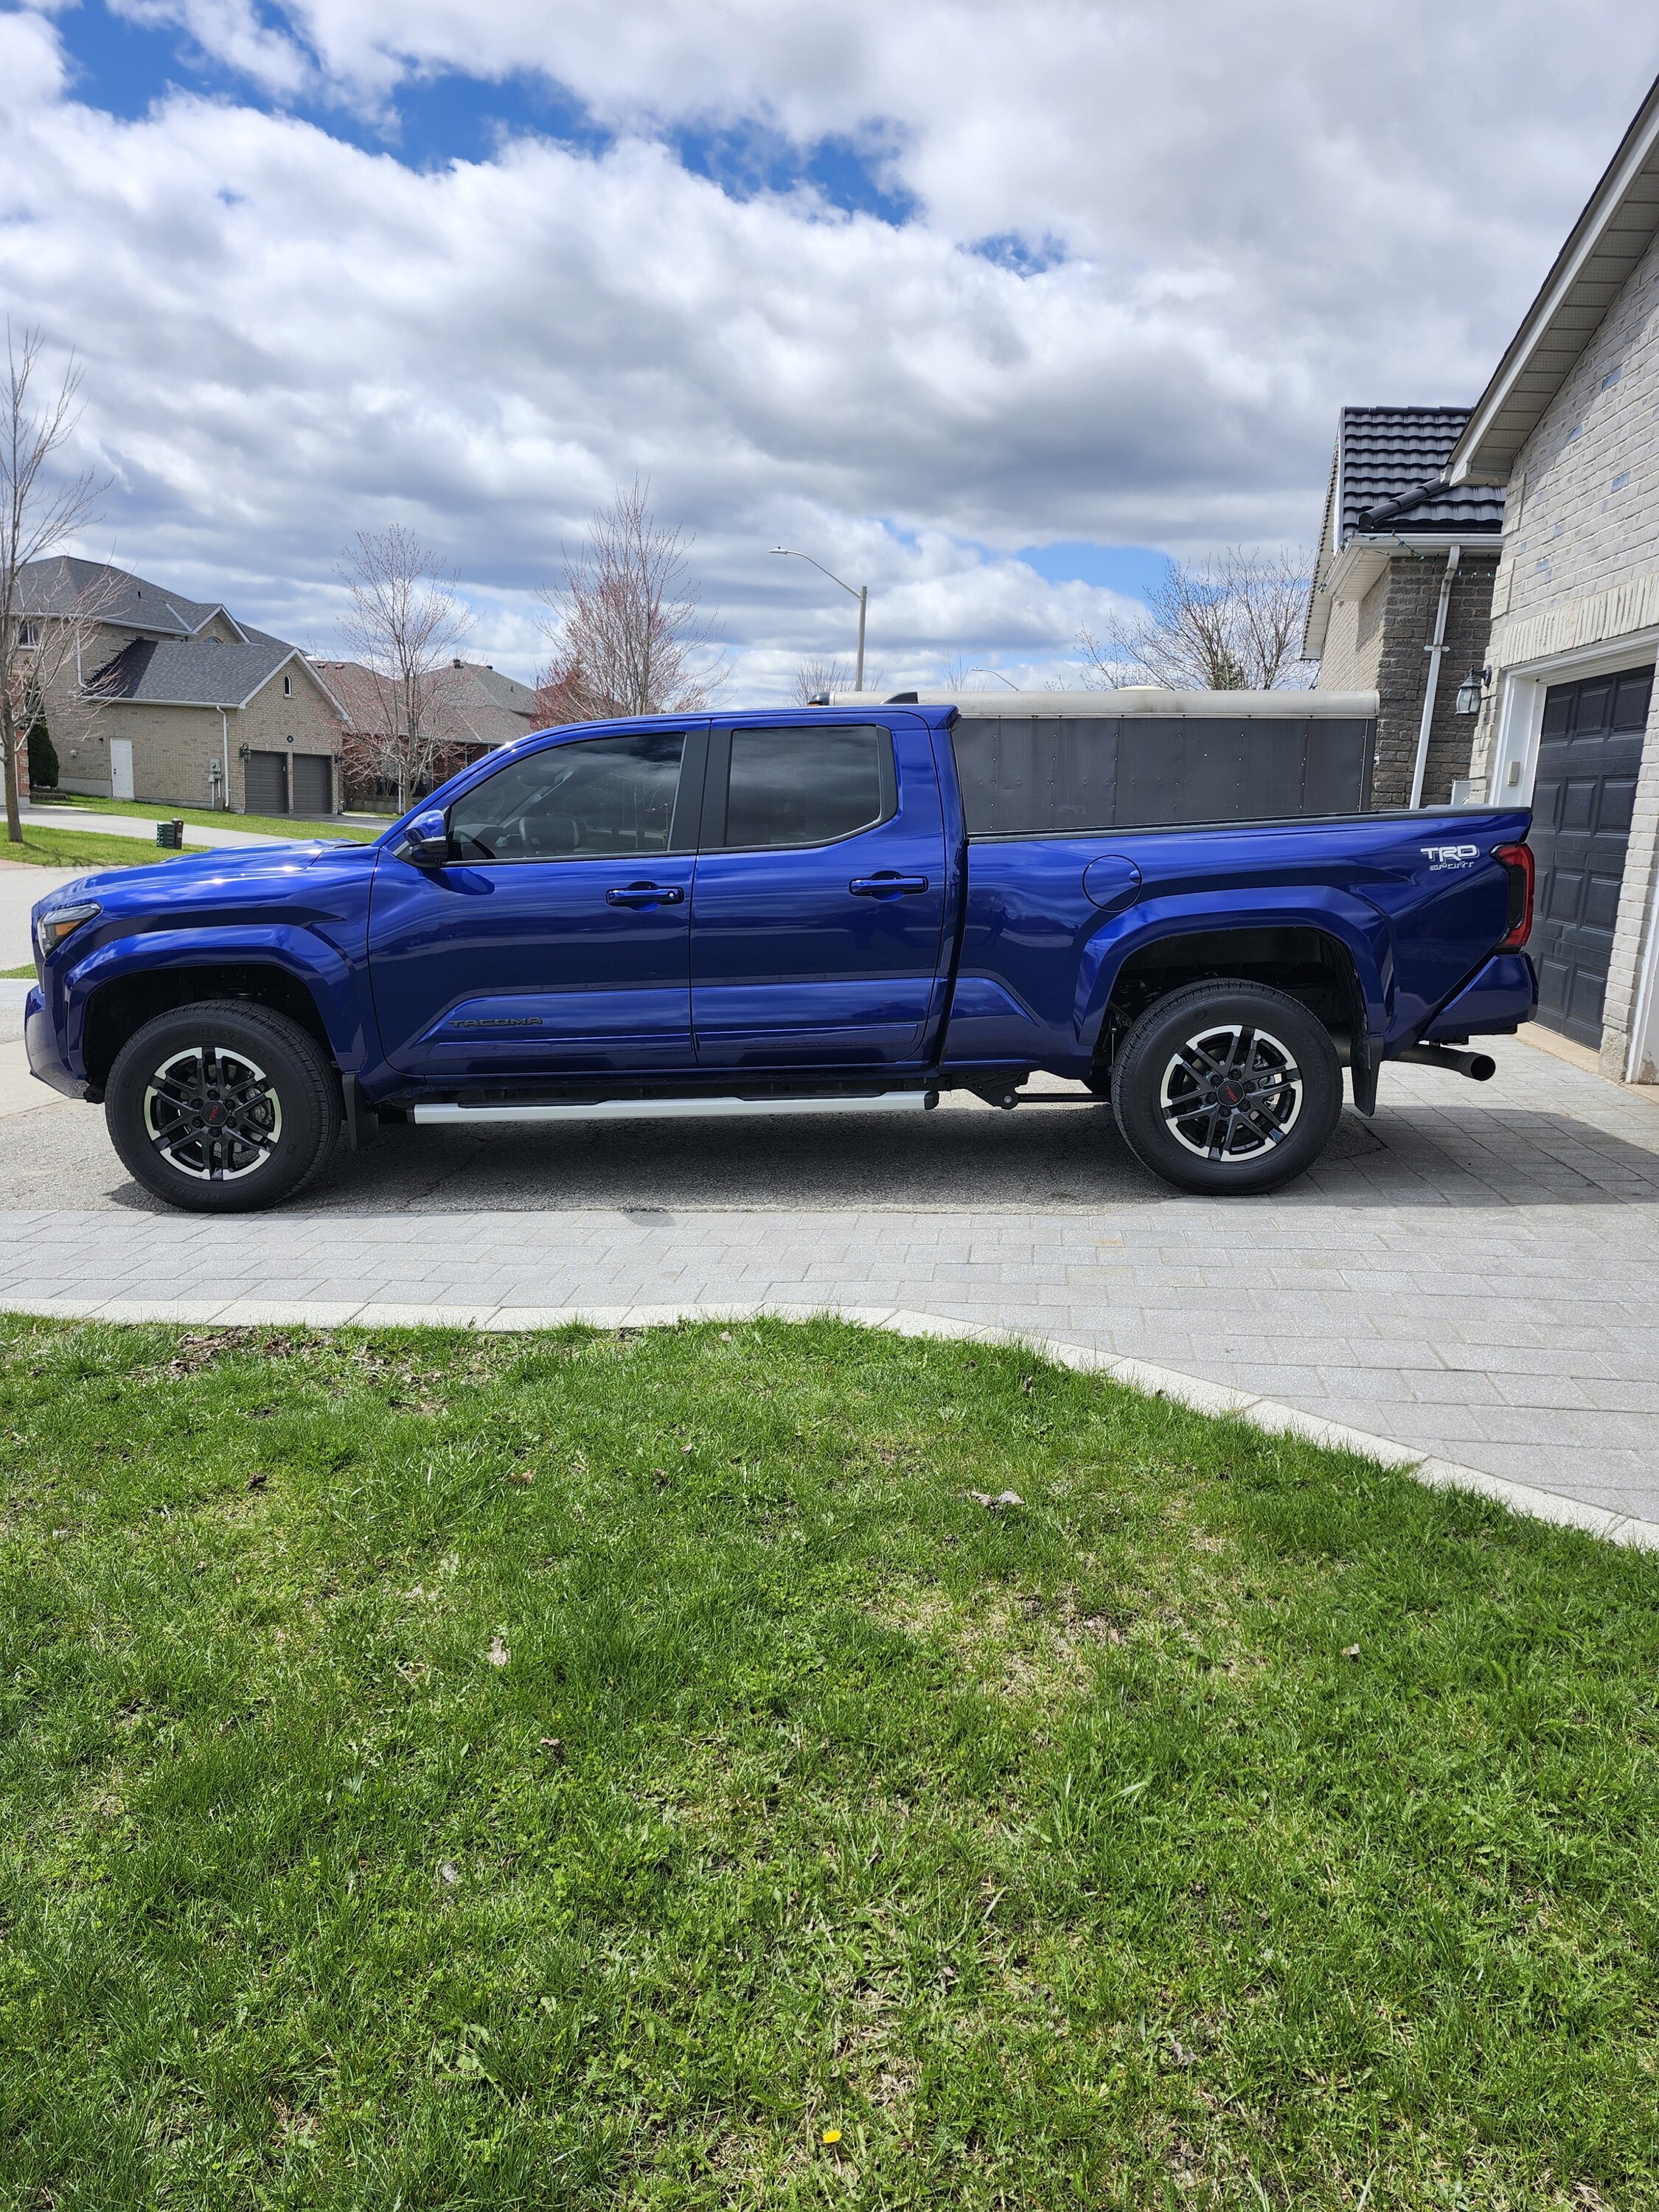 2024 Tacoma Couple pics after detailing + 2 coats Turtle wax pro graphene wax! Turned out 🔥 20240421_123656